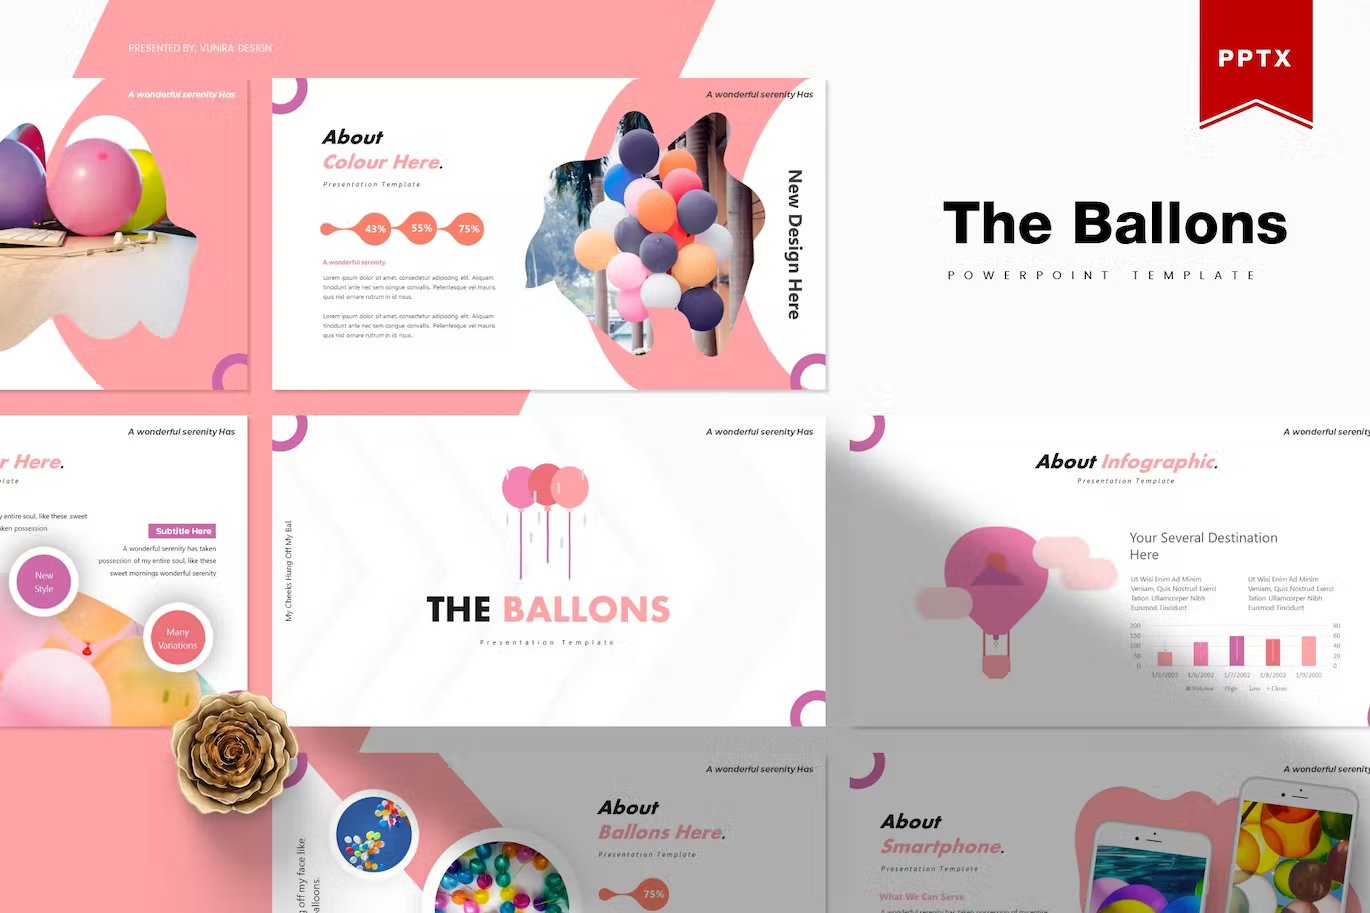 Black lettering "The Ballons Powerpoint Template" and different presentation templates in pink, white, purple and black on a white background.